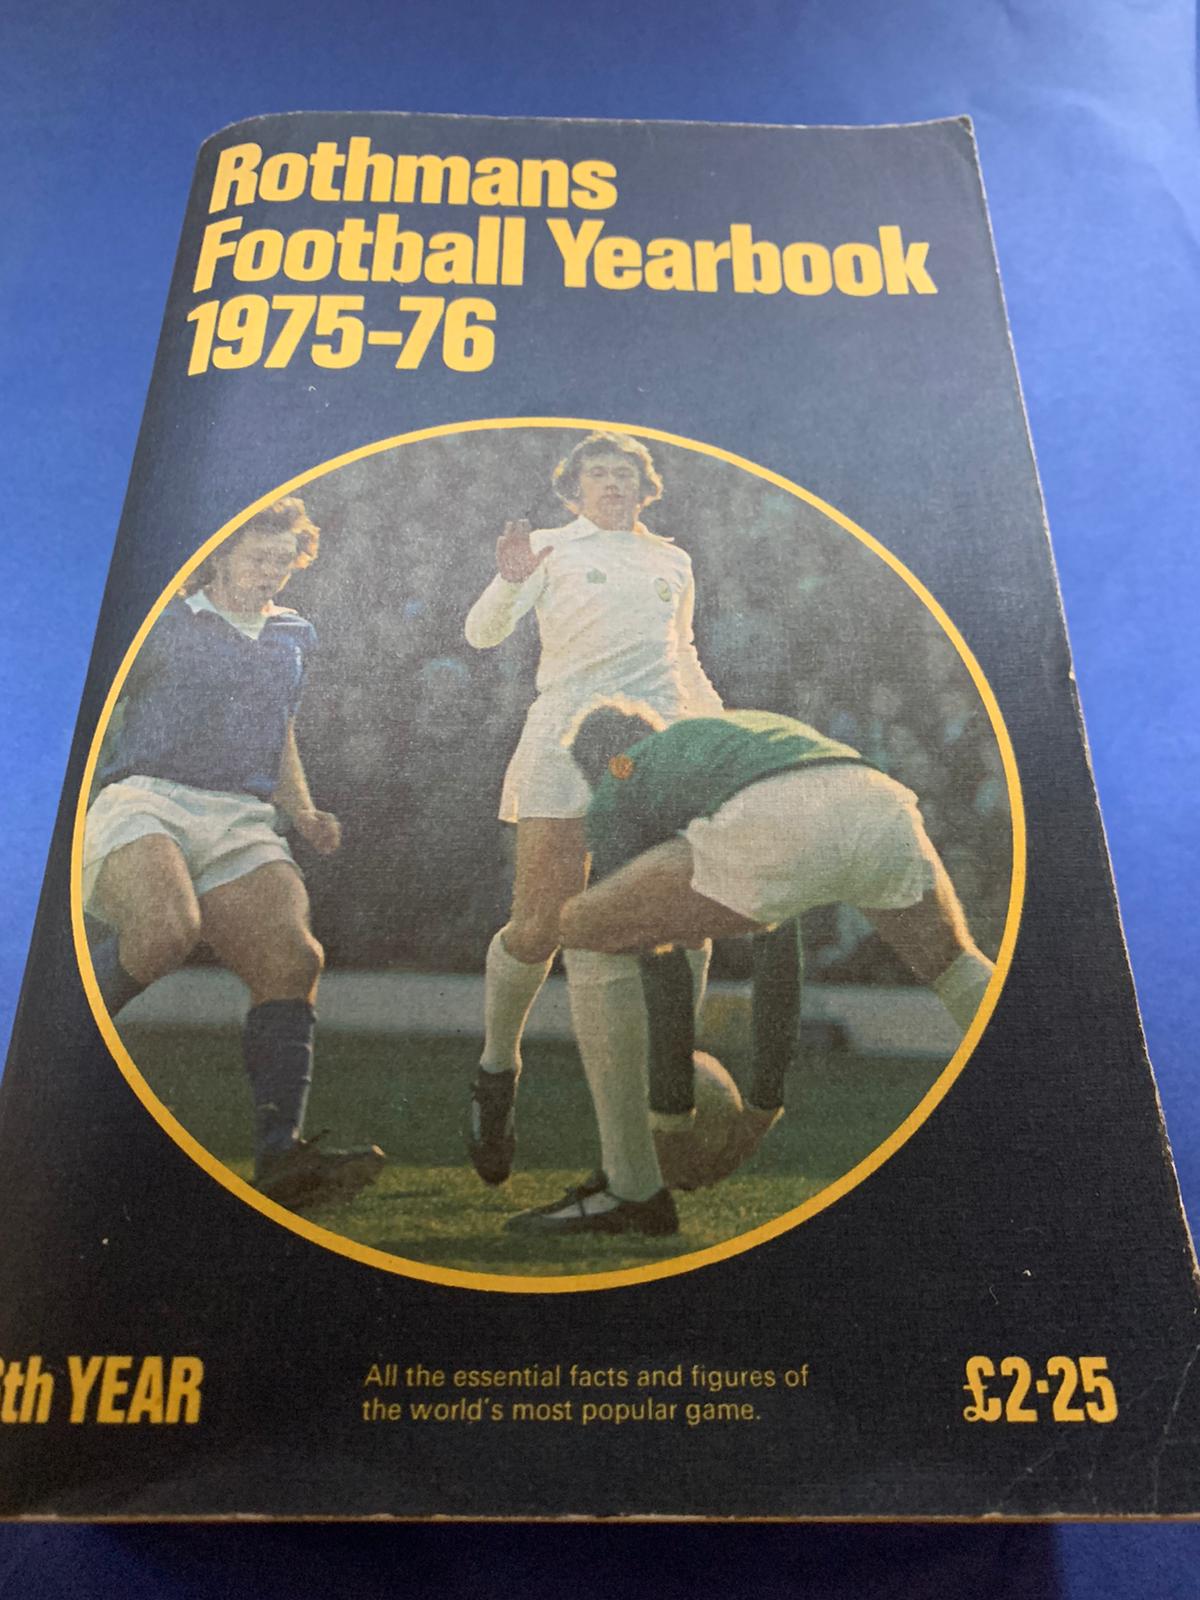 Rothmans Football Yearbook 1975-76